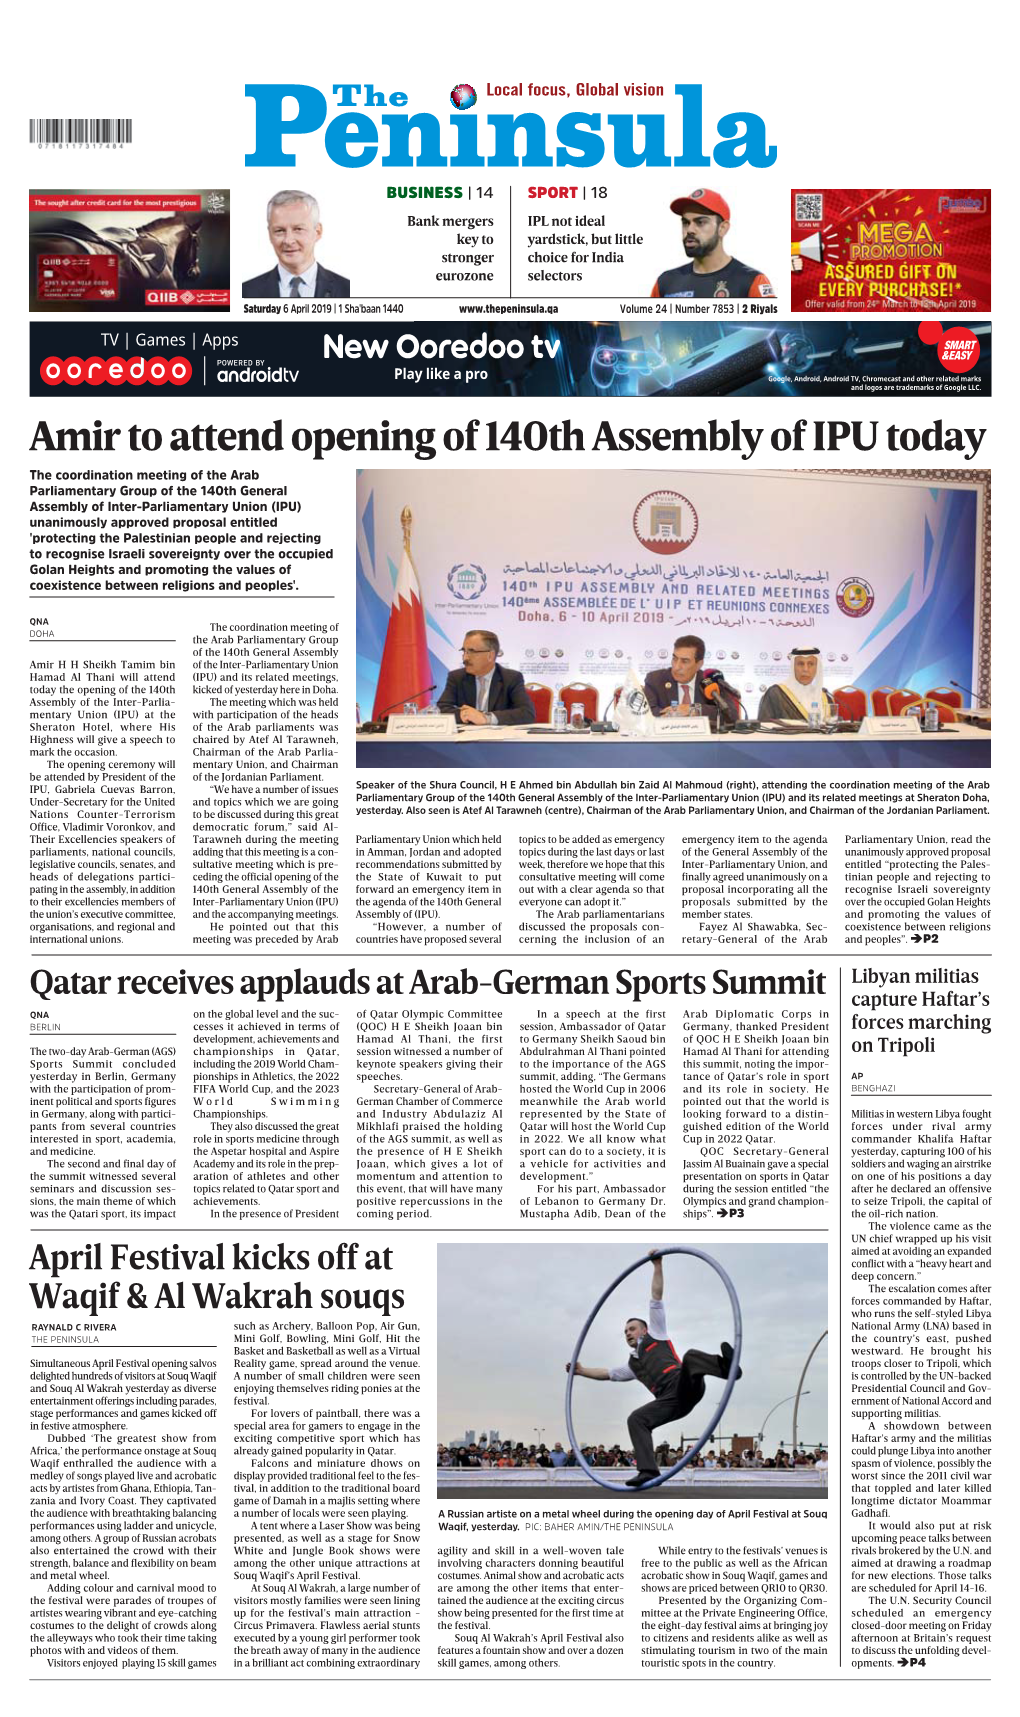 Amir to Attend Opening of 140Th Assembly of IPU Today